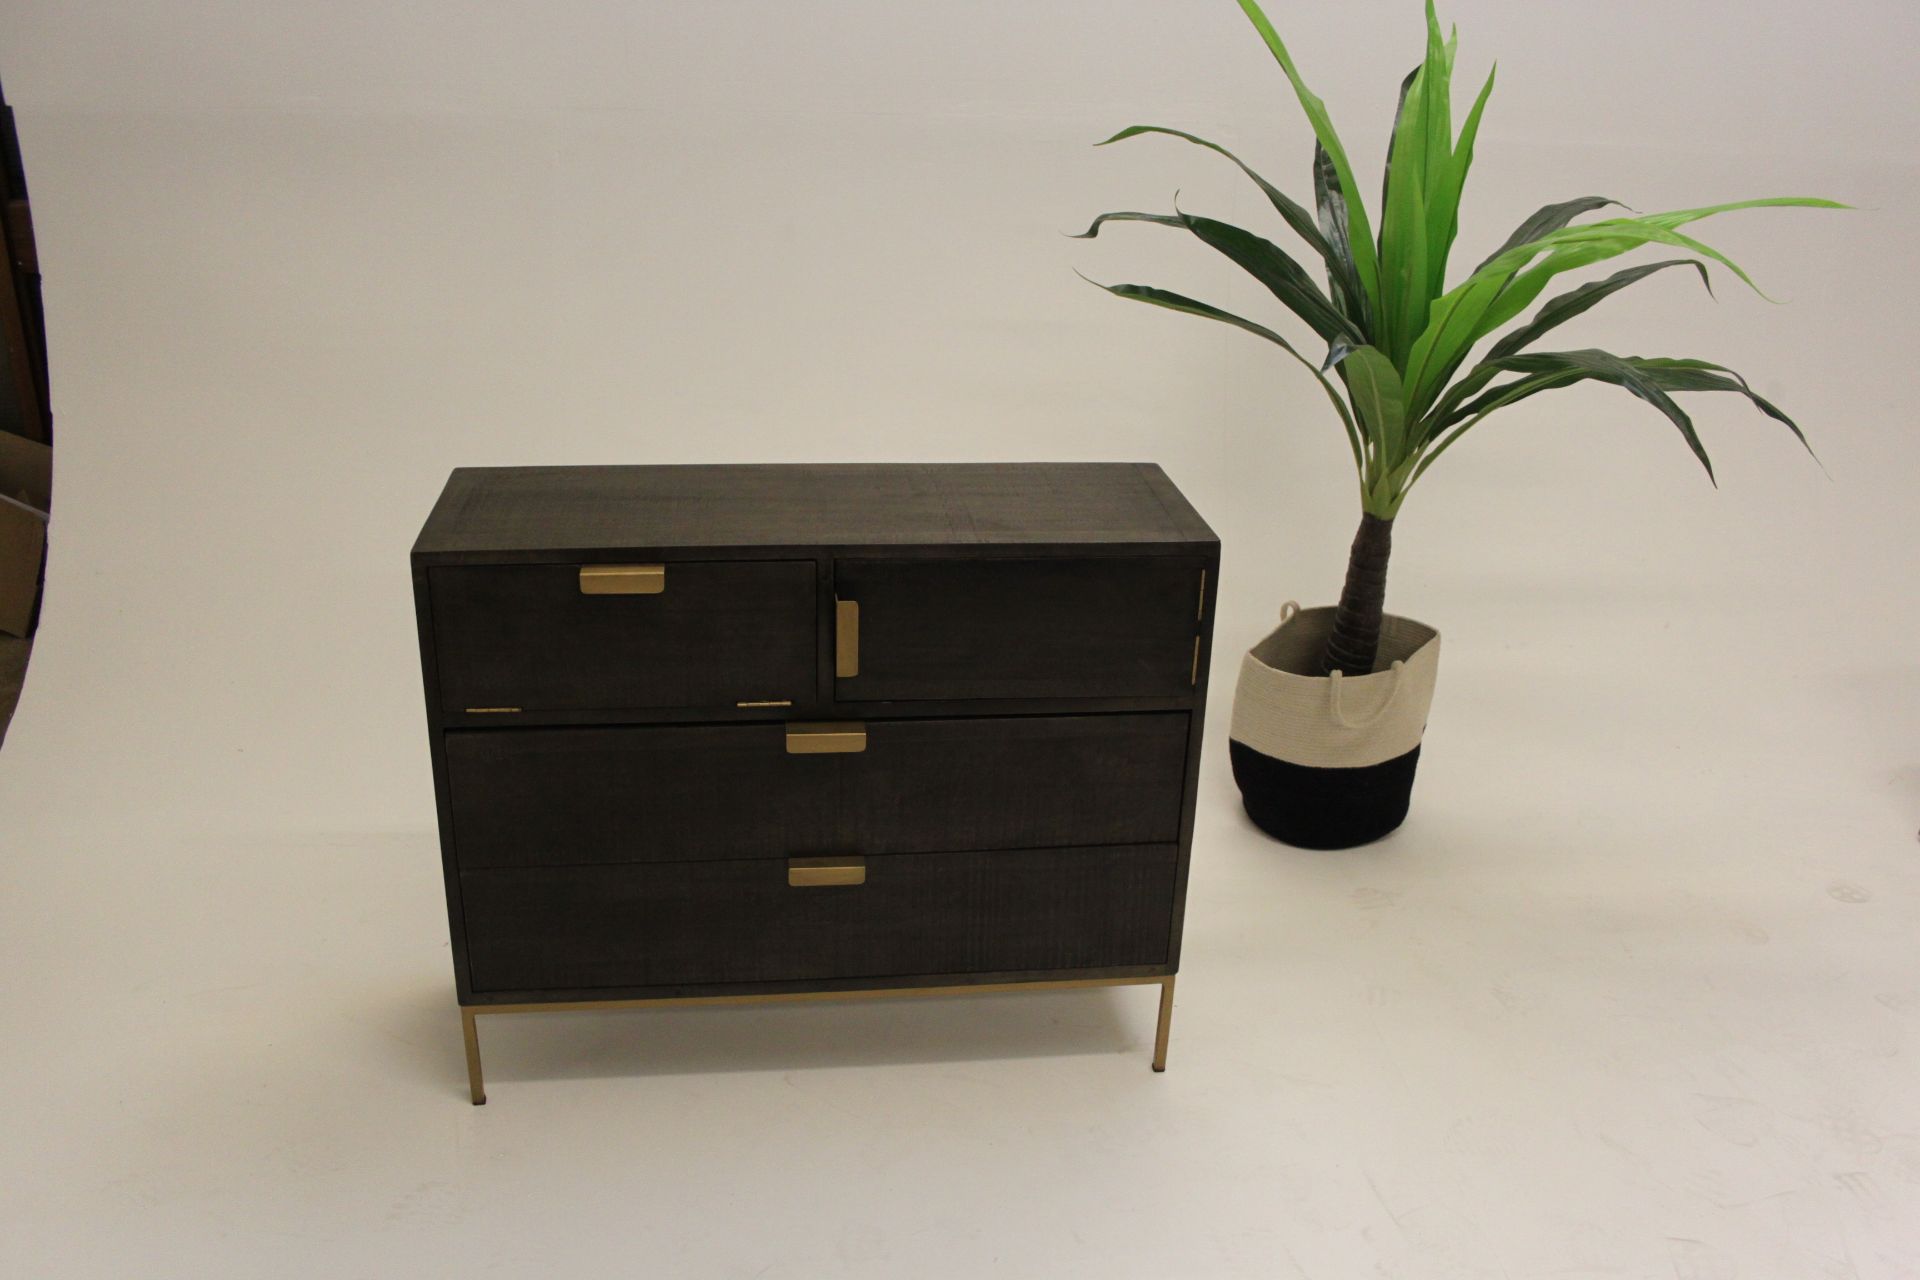 Gatsby Chest Black And Gold Add Some Sophistication To Your Home With The Gatsby Chest Its Art